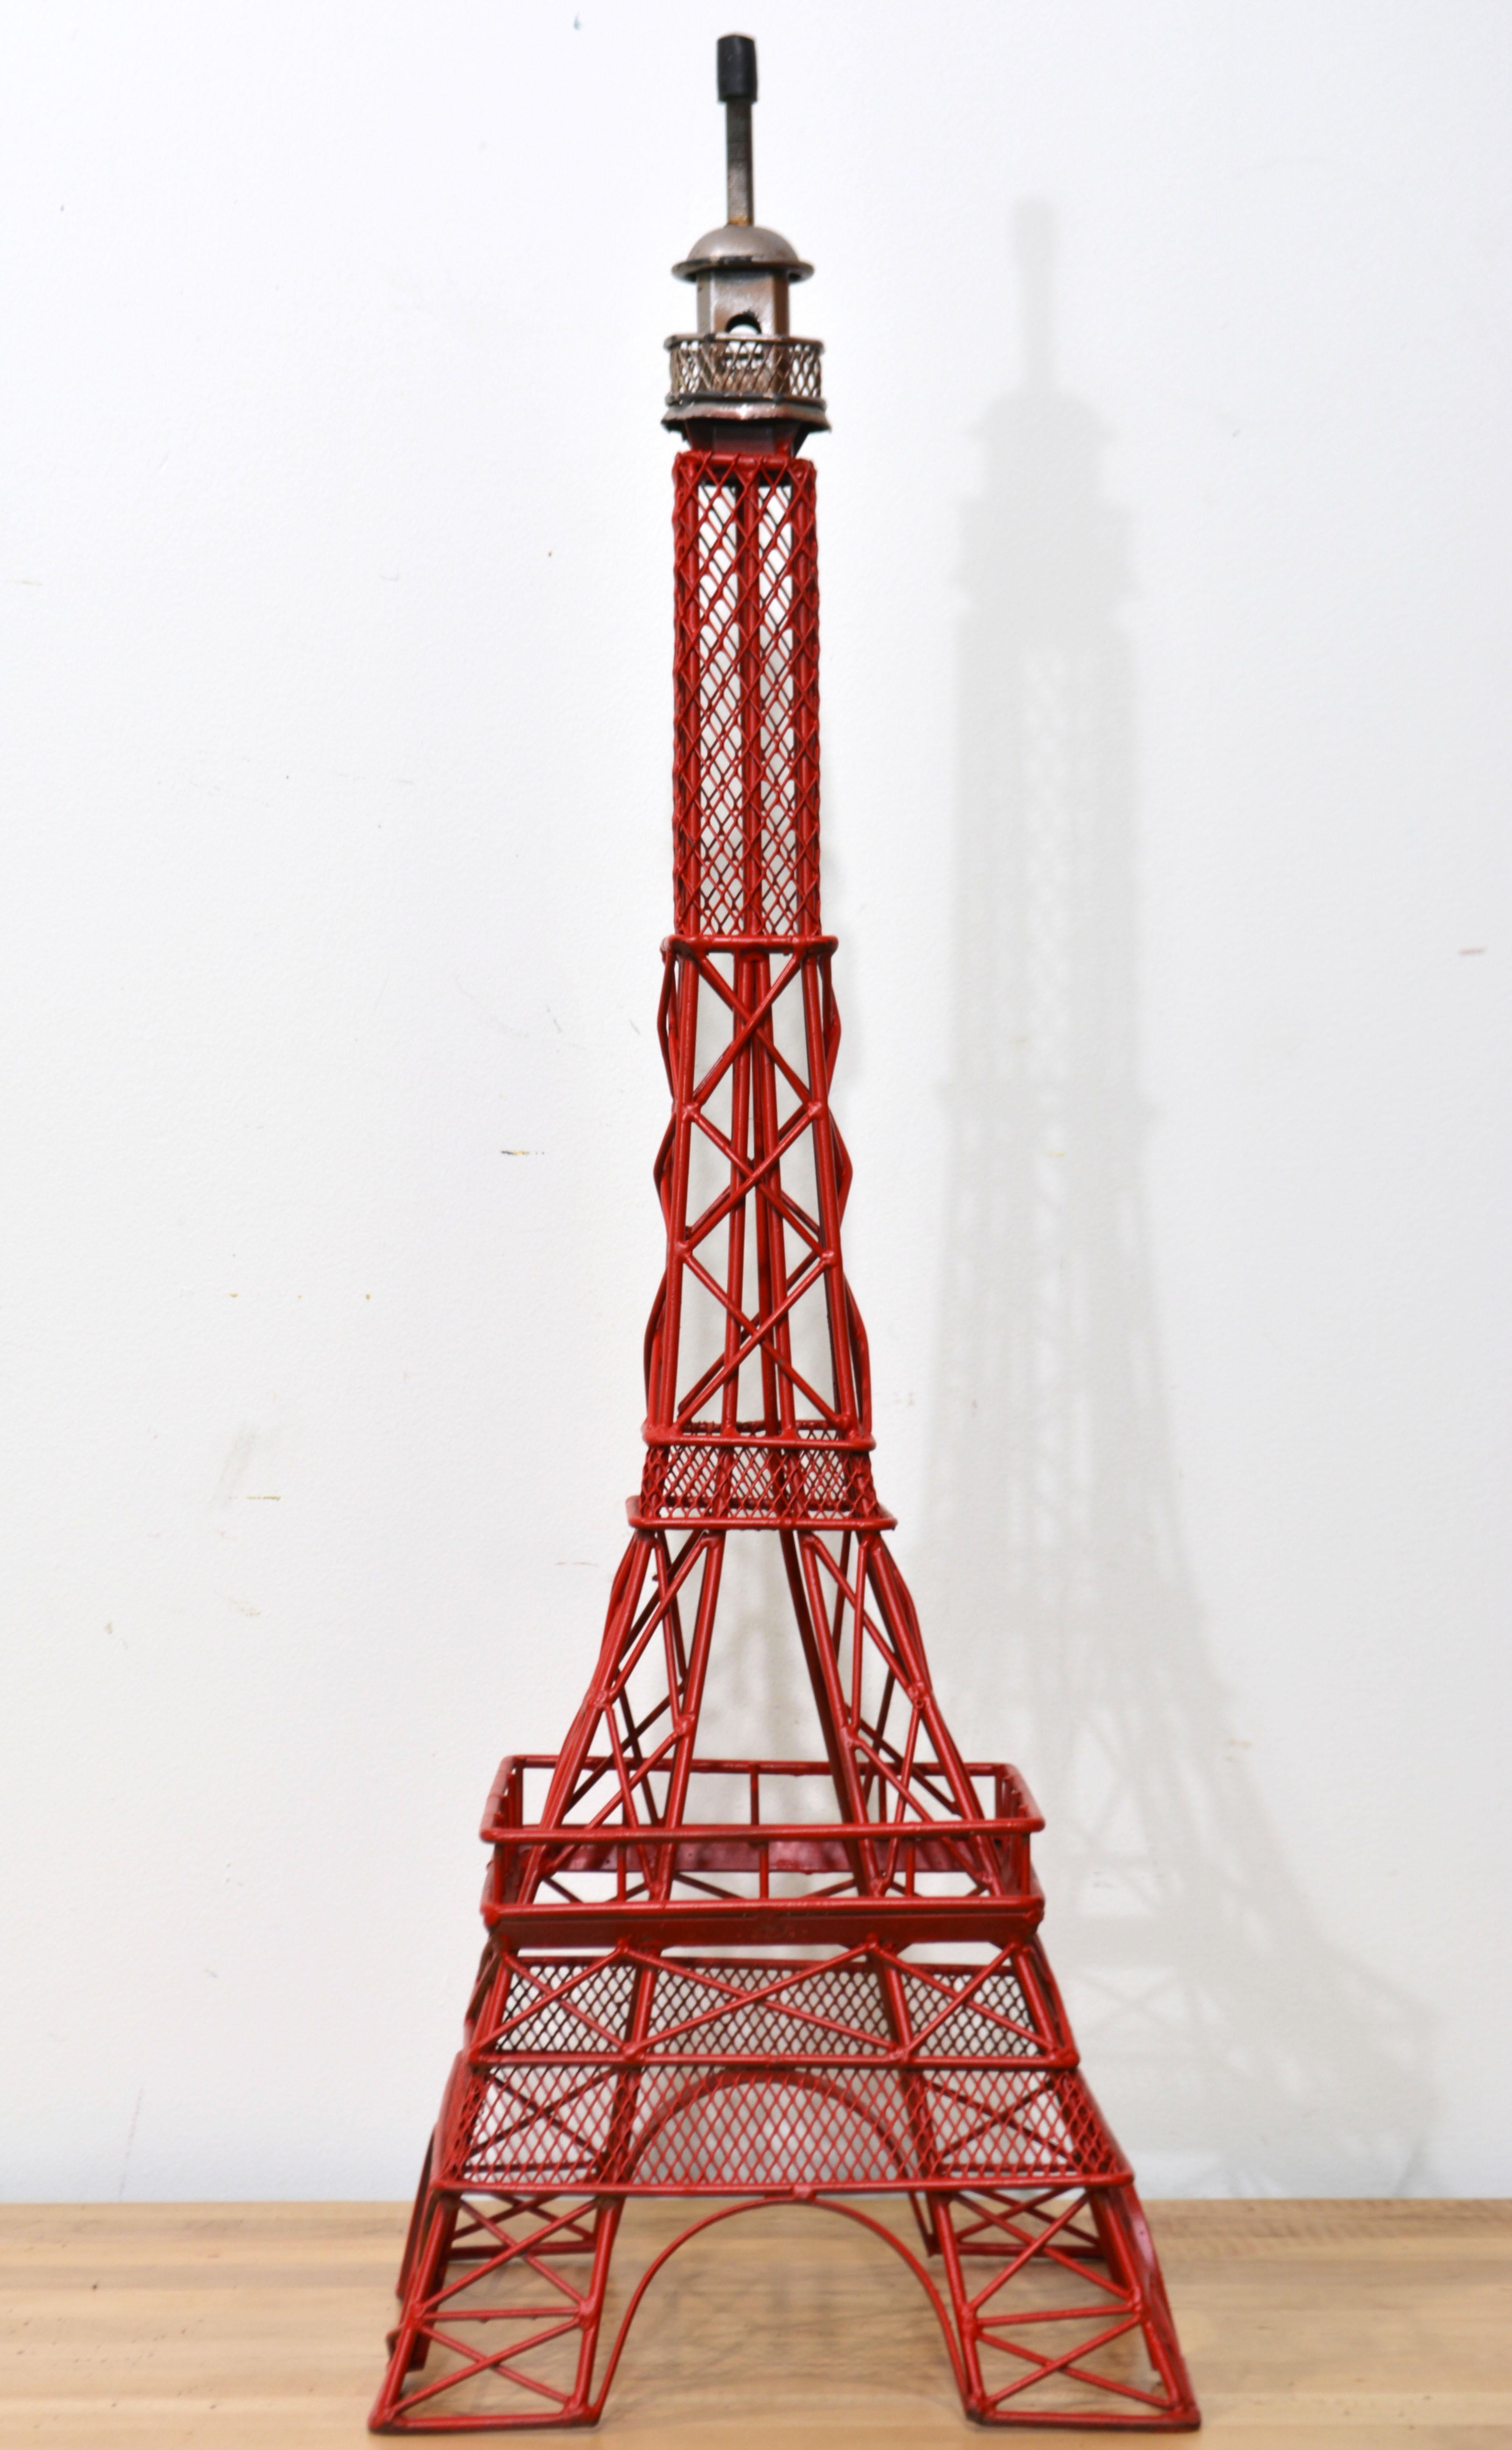 Tall Painted Decorative Steel Eifel Tower Inspired Lighthouse Sculpture or Model For Sale 5